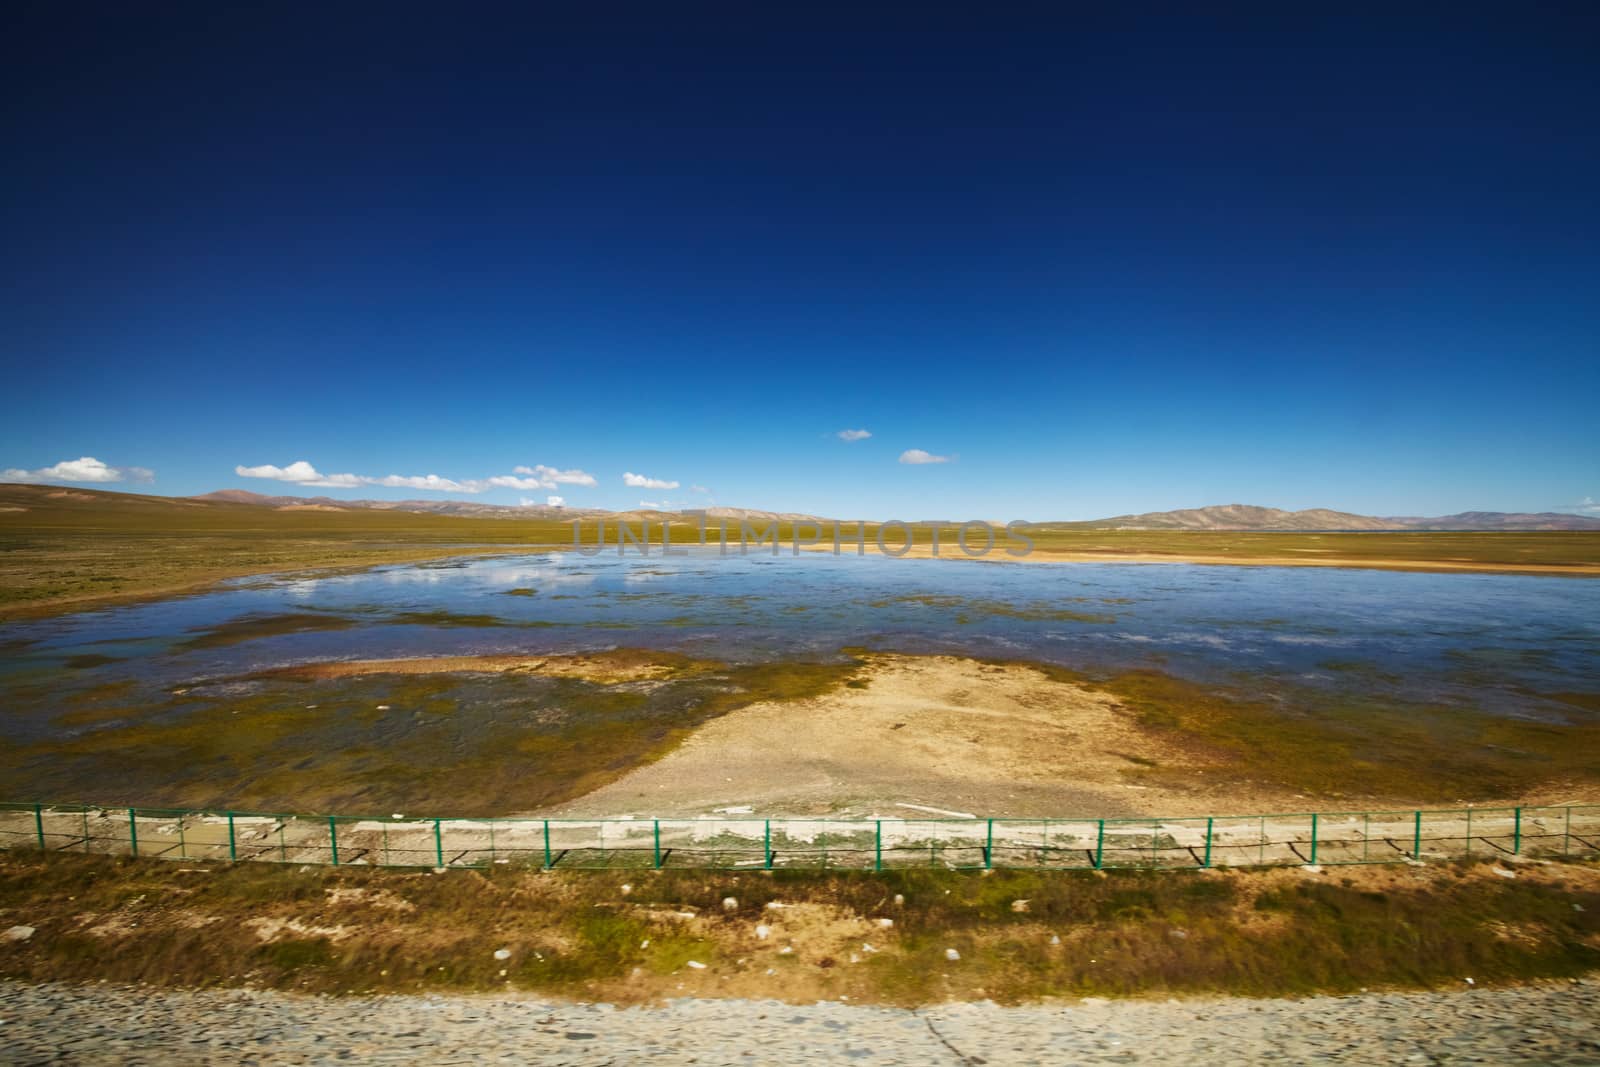 A view of clear blue lake with mountain landscape in the background at Tibetan Plateau